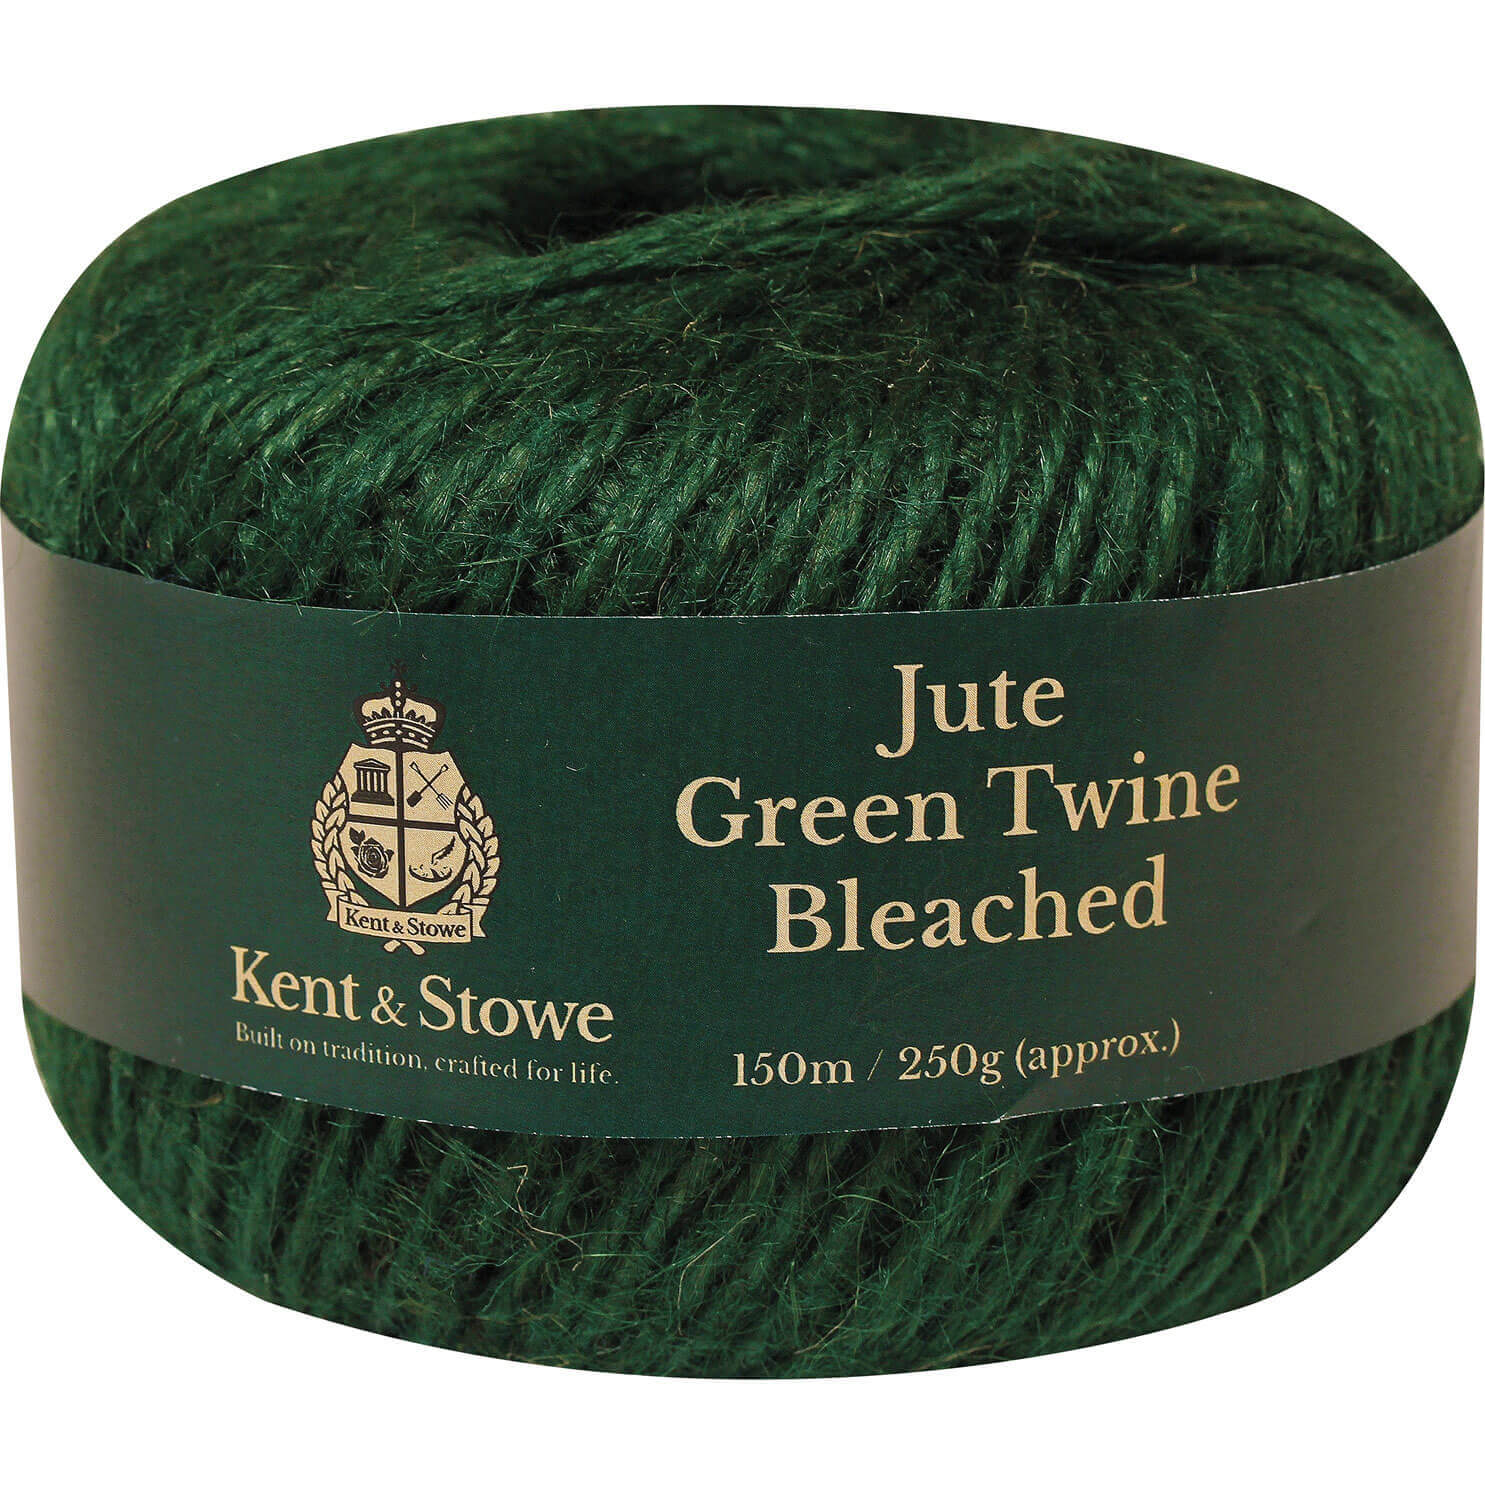 Image of Kent and Stowe Jute Garden Twine Bleached Green 150m